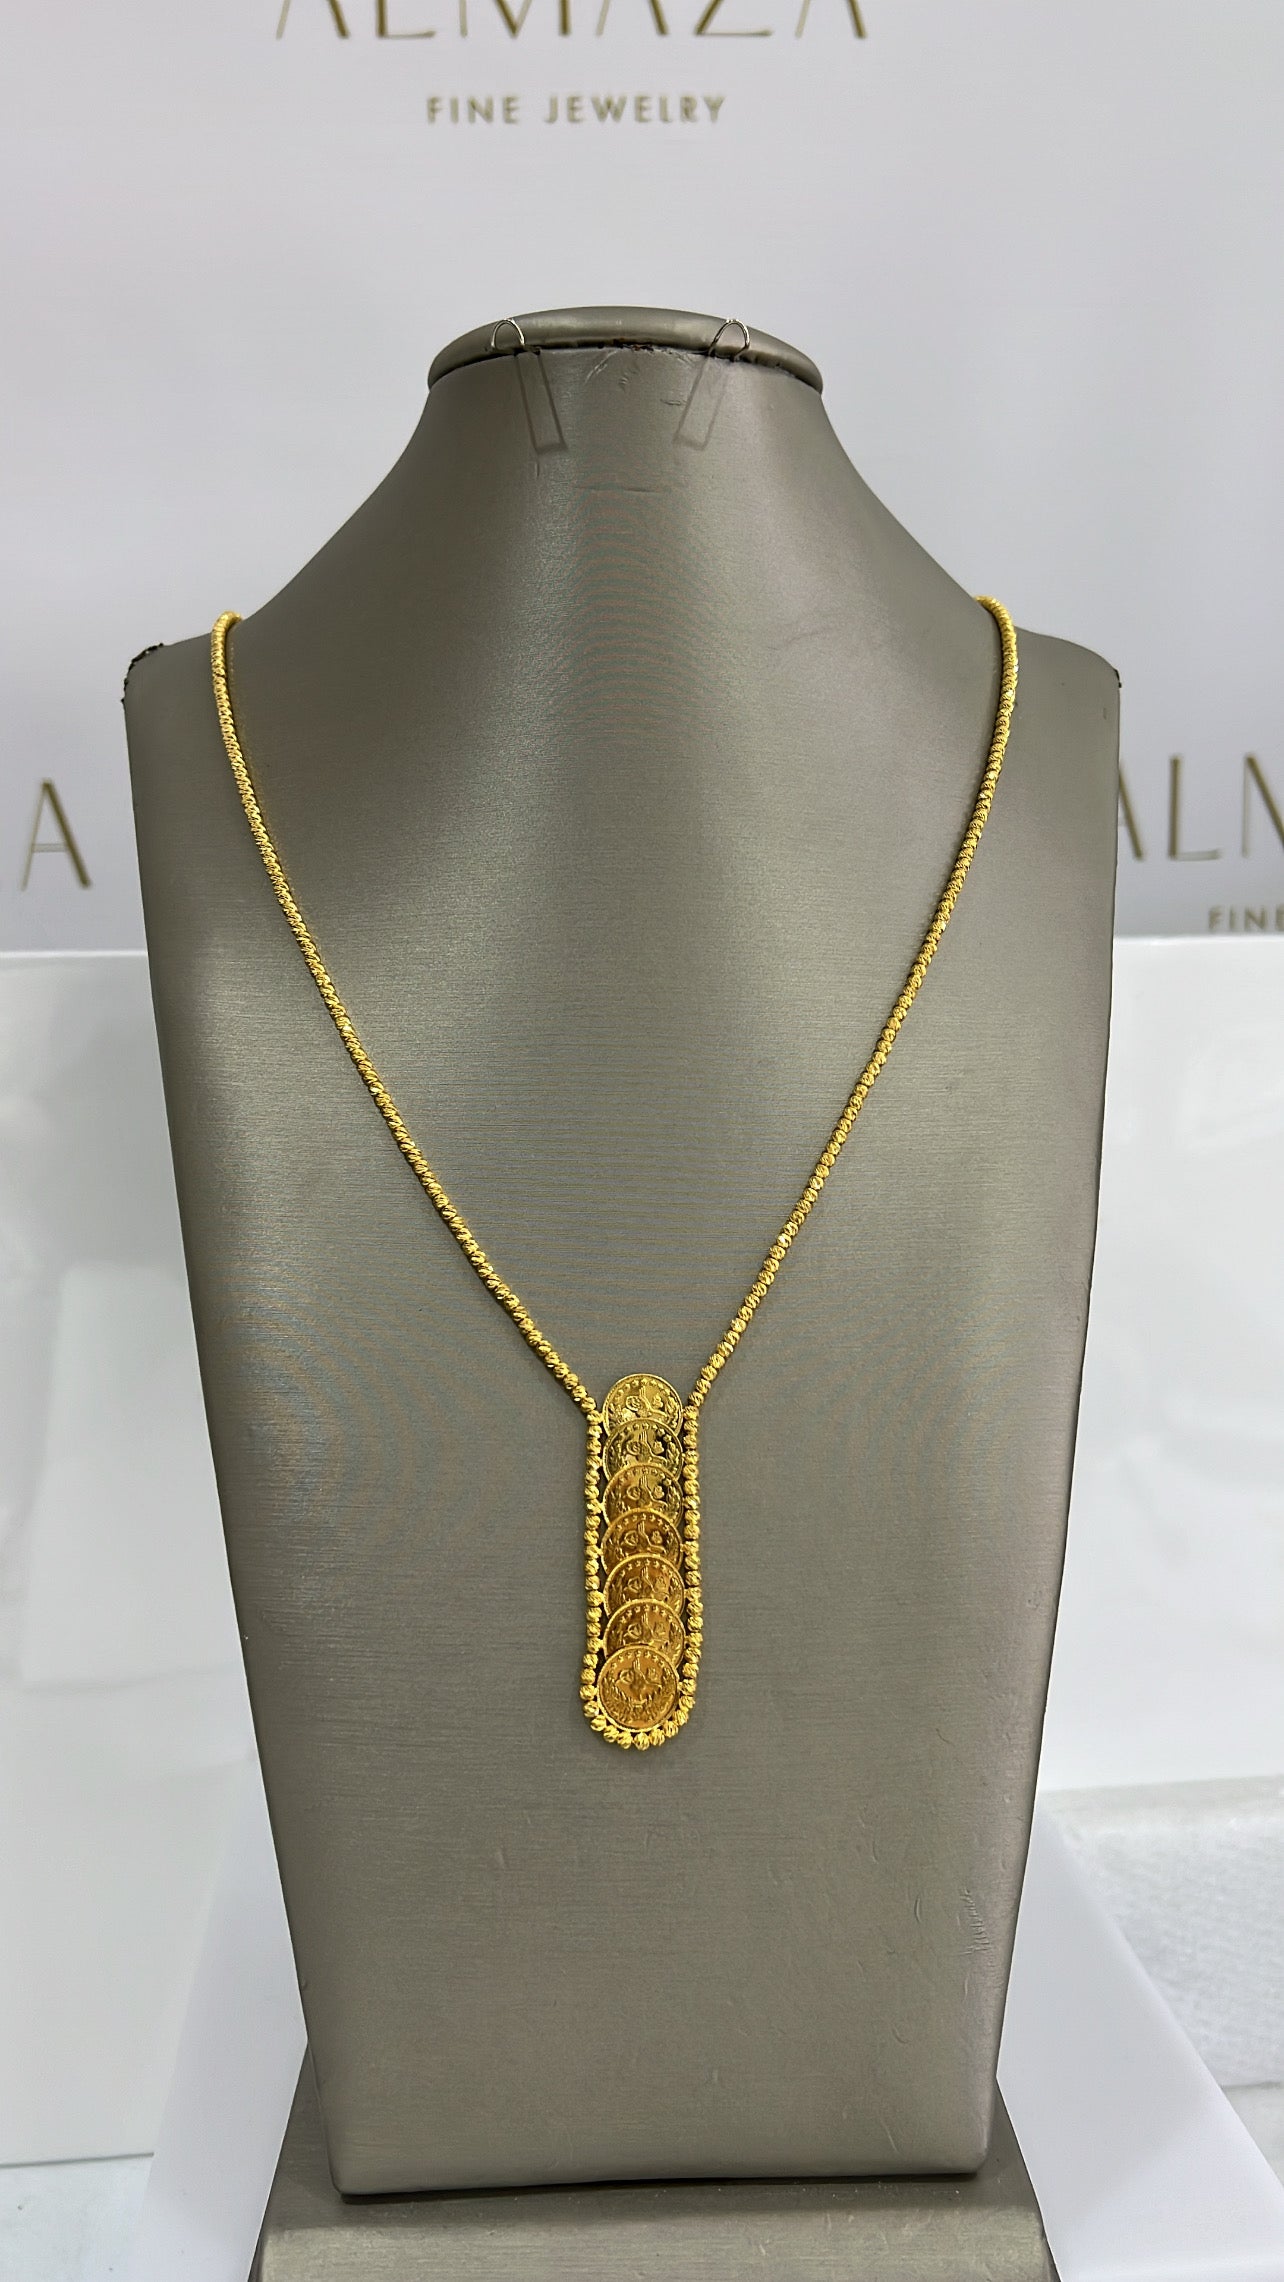 21k Gold Turkish Coin Himo Necklace